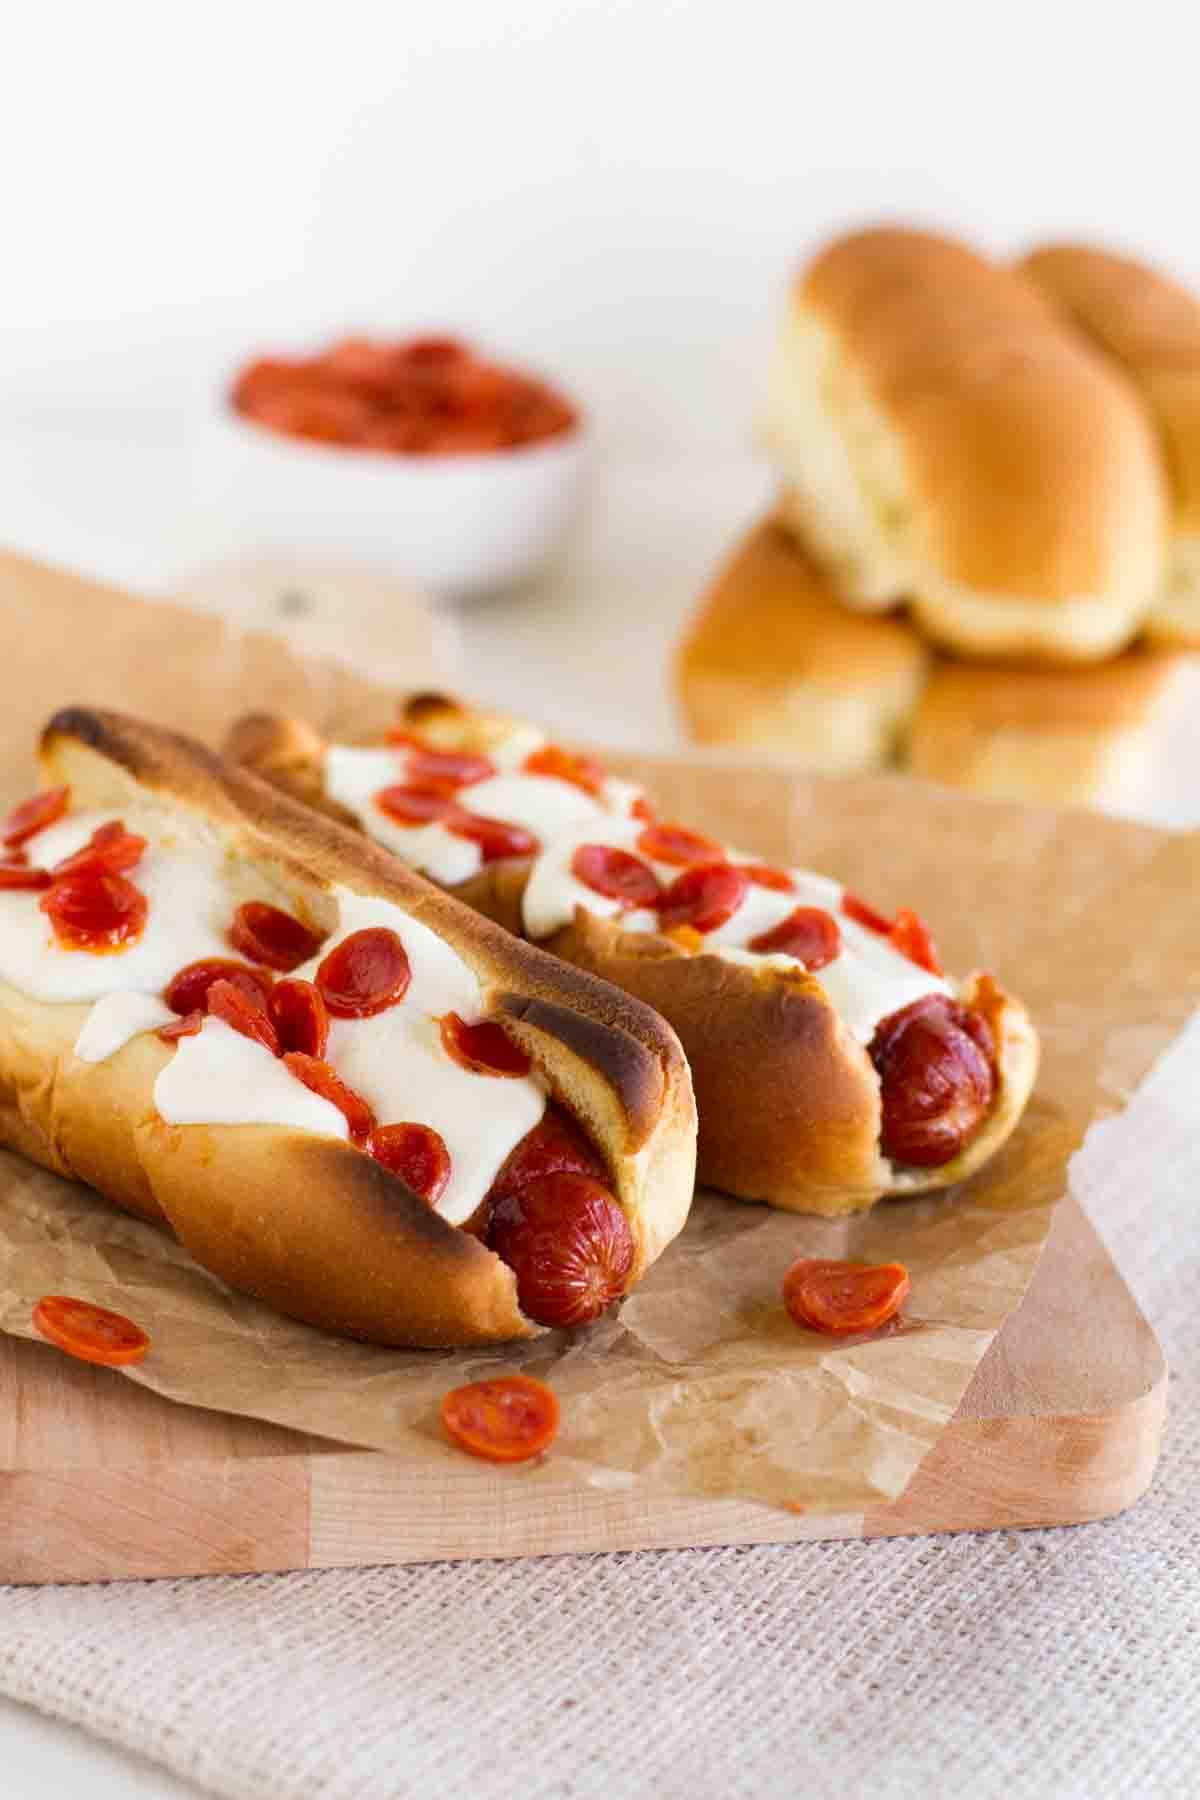 How To Make A Hot Dog